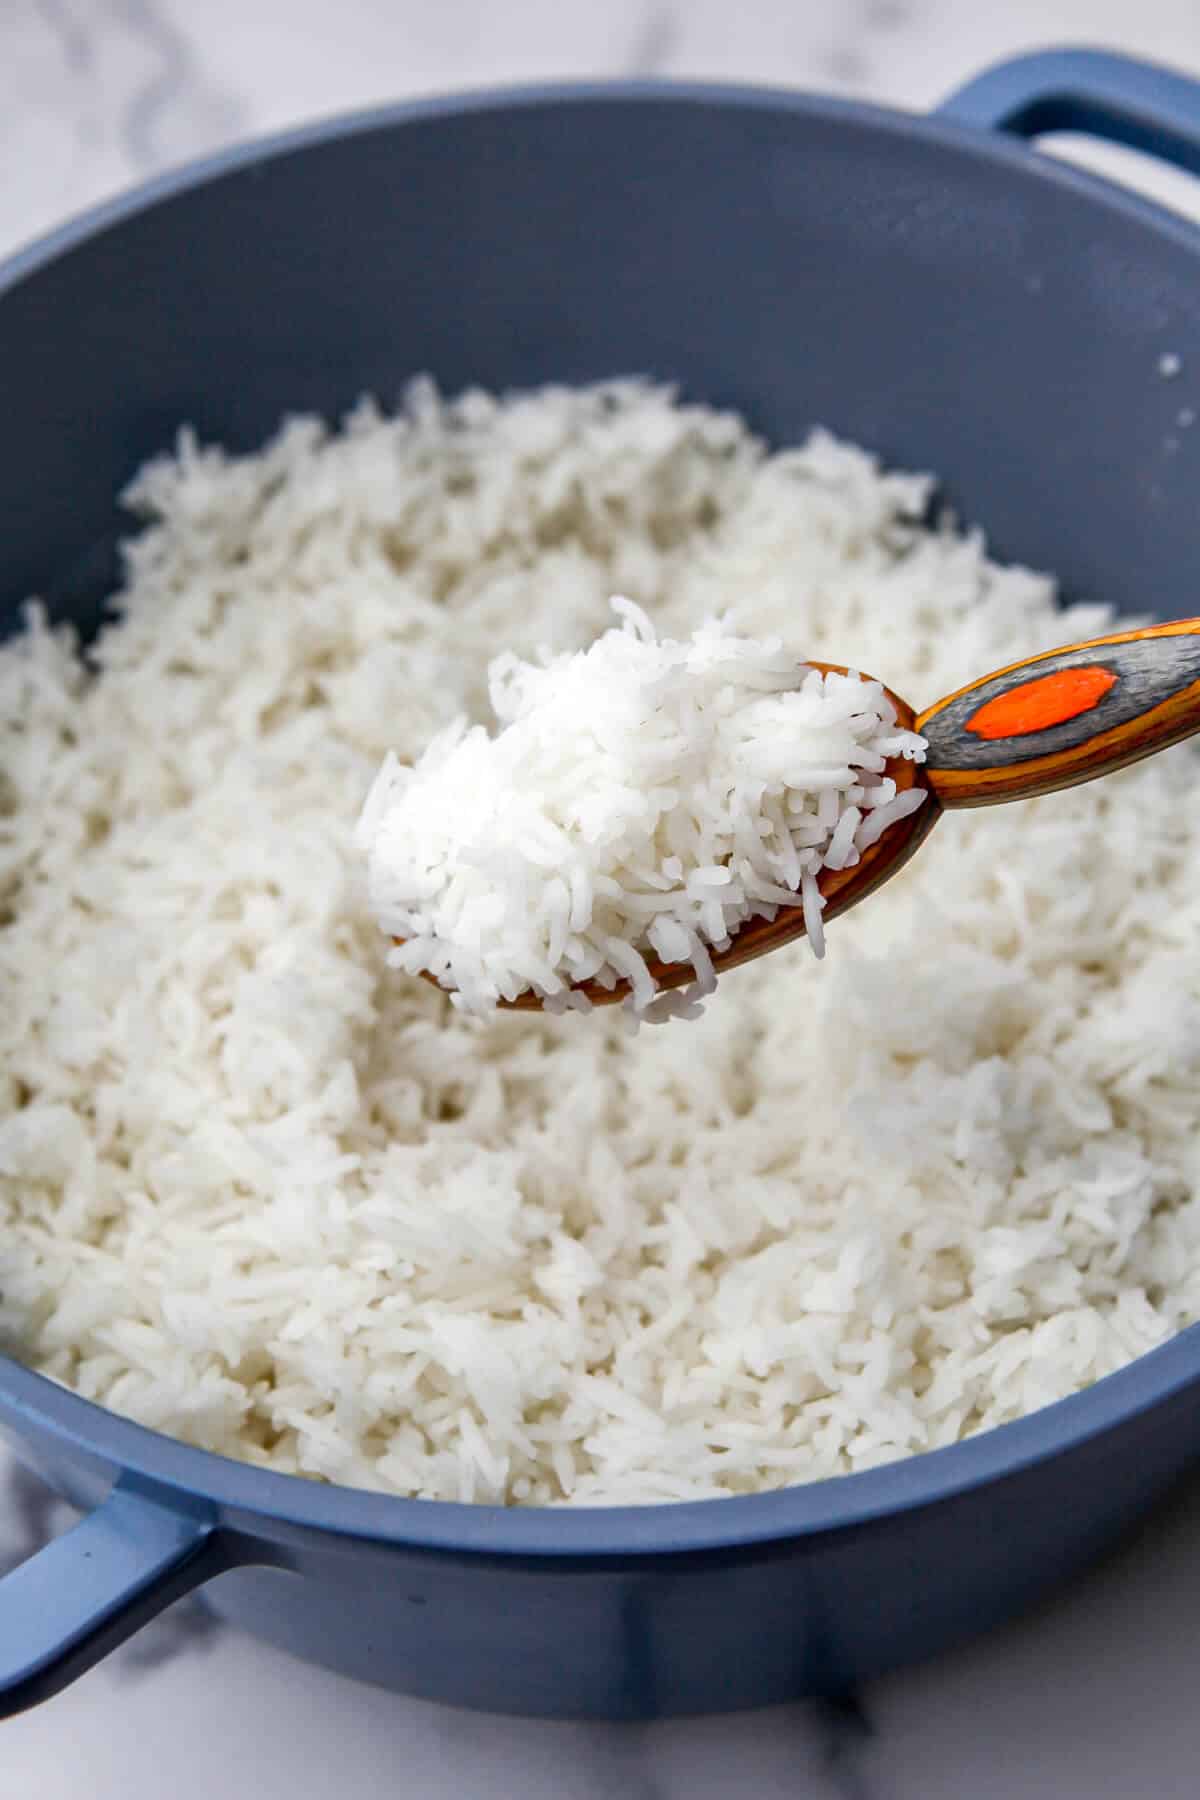 A blue pot filled with fluffy cooked Basmati rice.